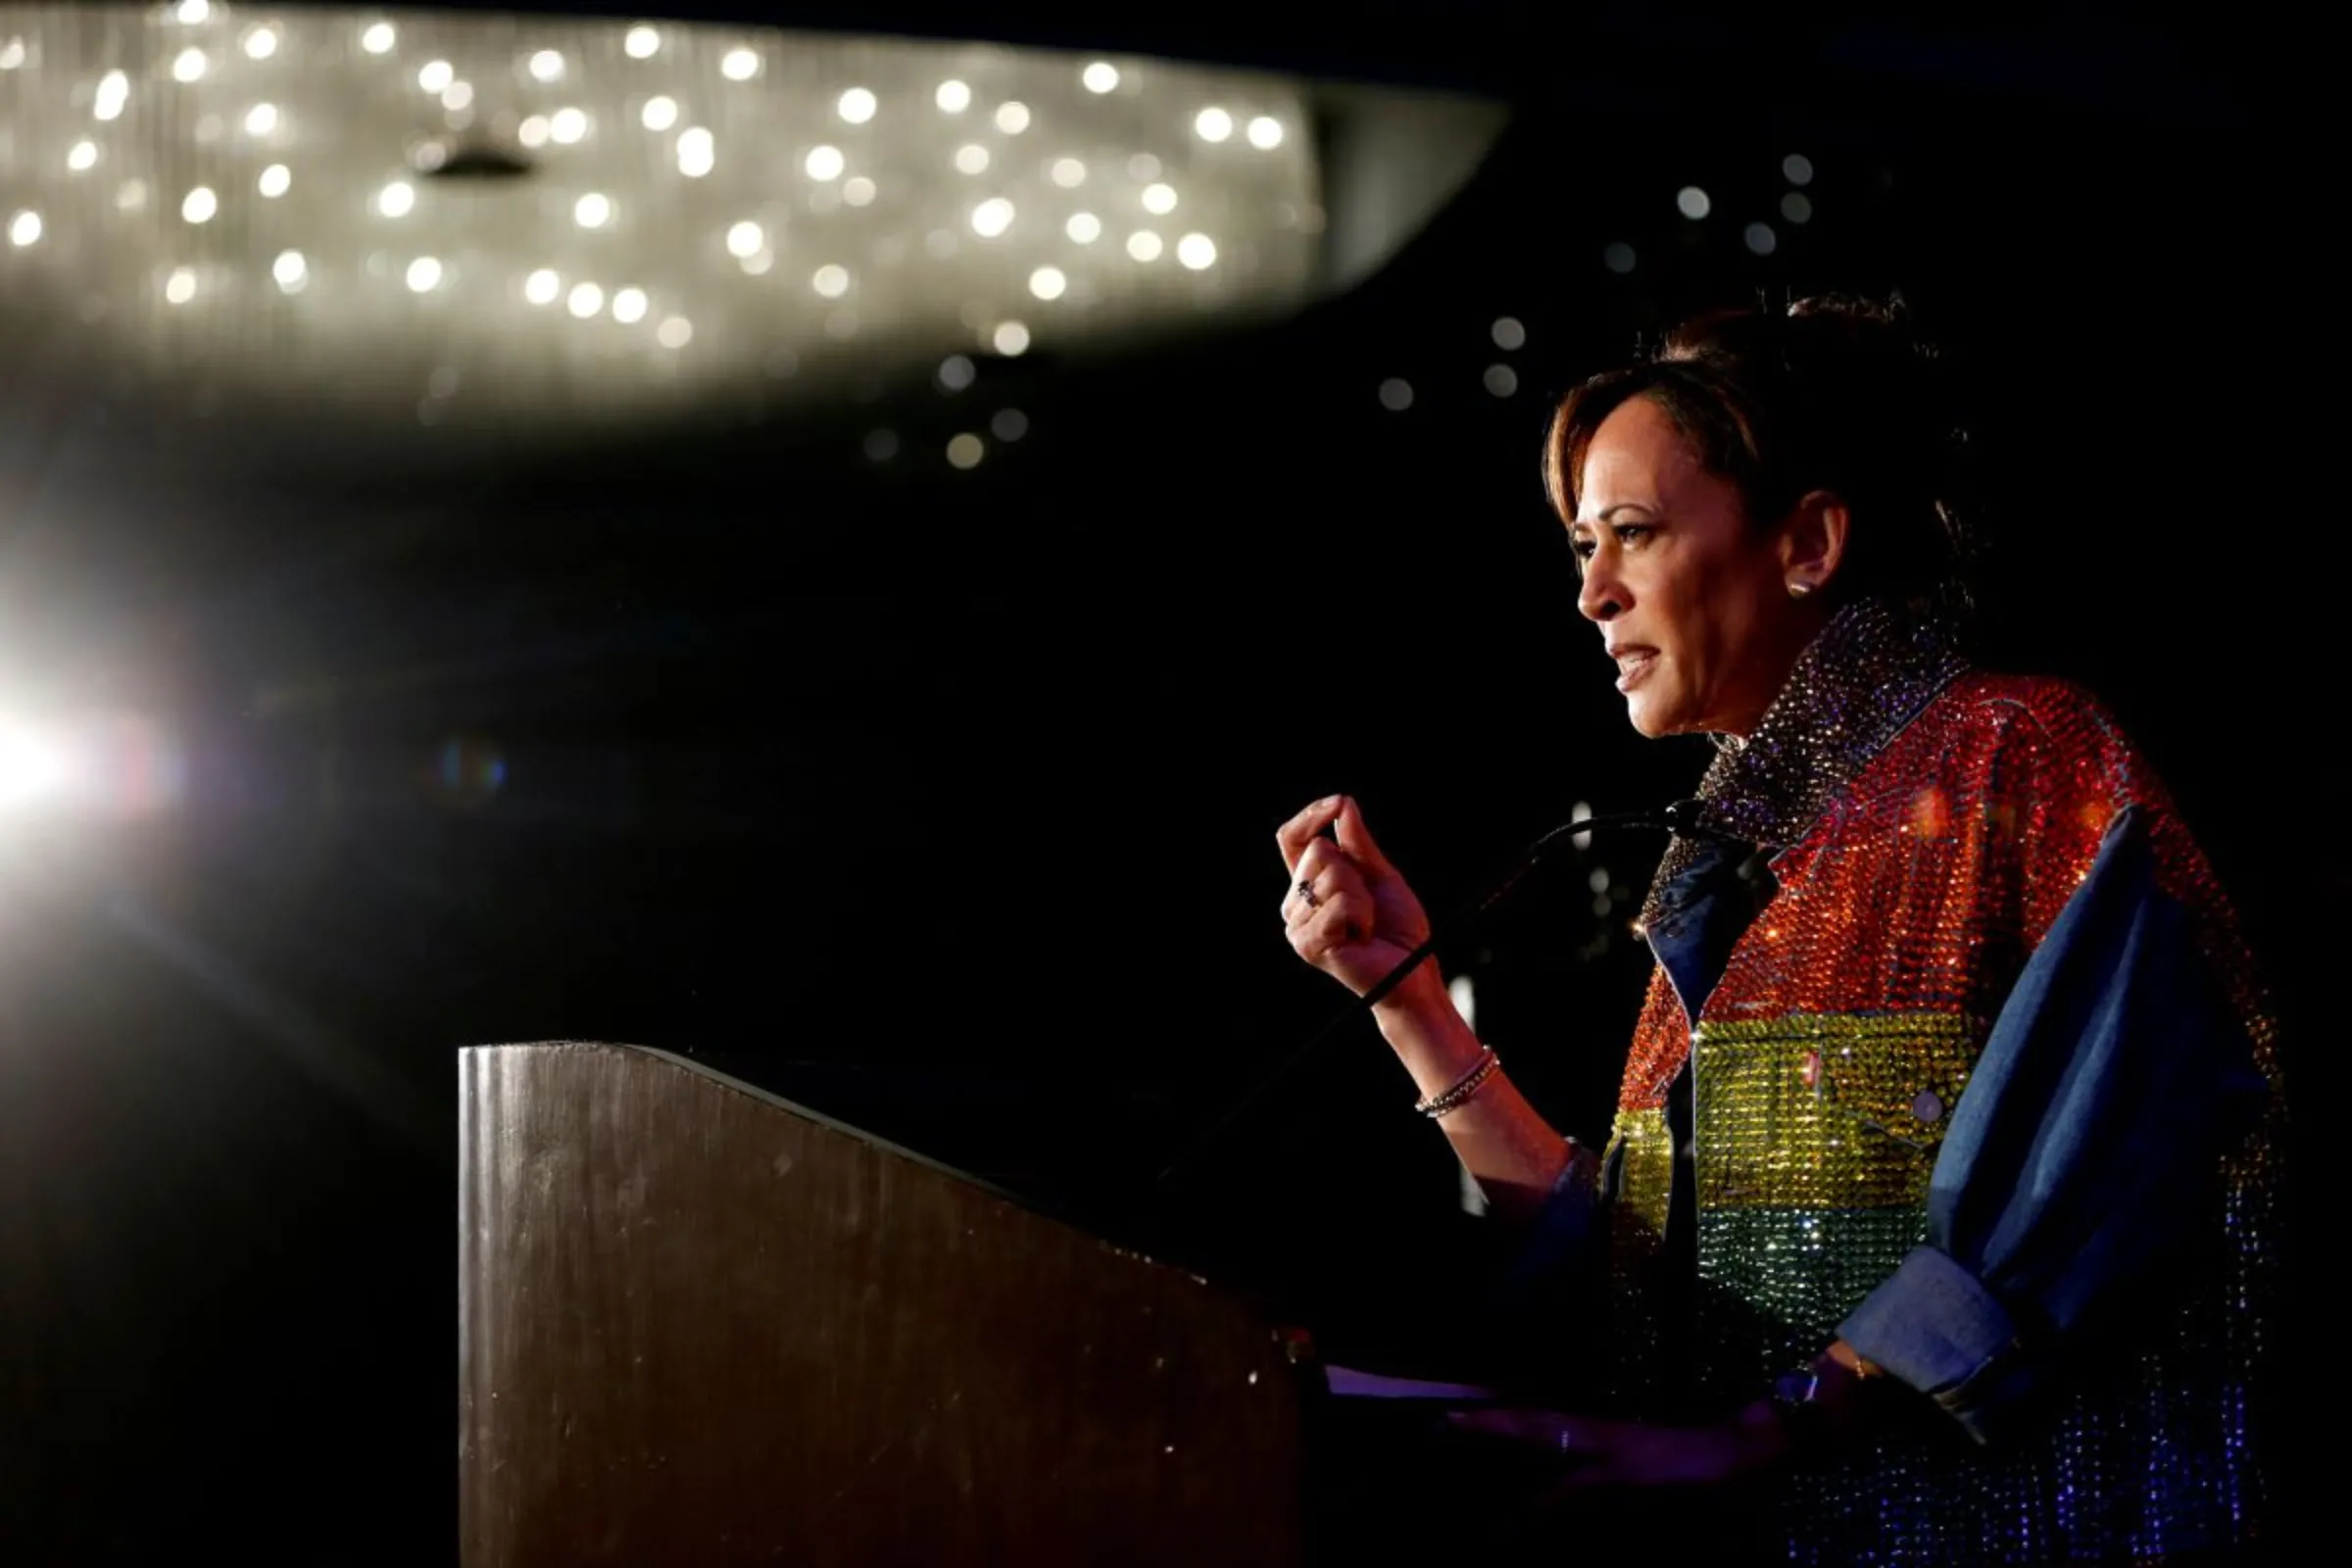 Democratic presidential candidate Kamala Harris speaks during the Alice B. Toklas Club Annual Pride Breakfast before taking part in the annual Pride parade in support of the LGBTQ community in San Francisco, California, U.S. June 30, 2019. REUTERS/Stephen Lam